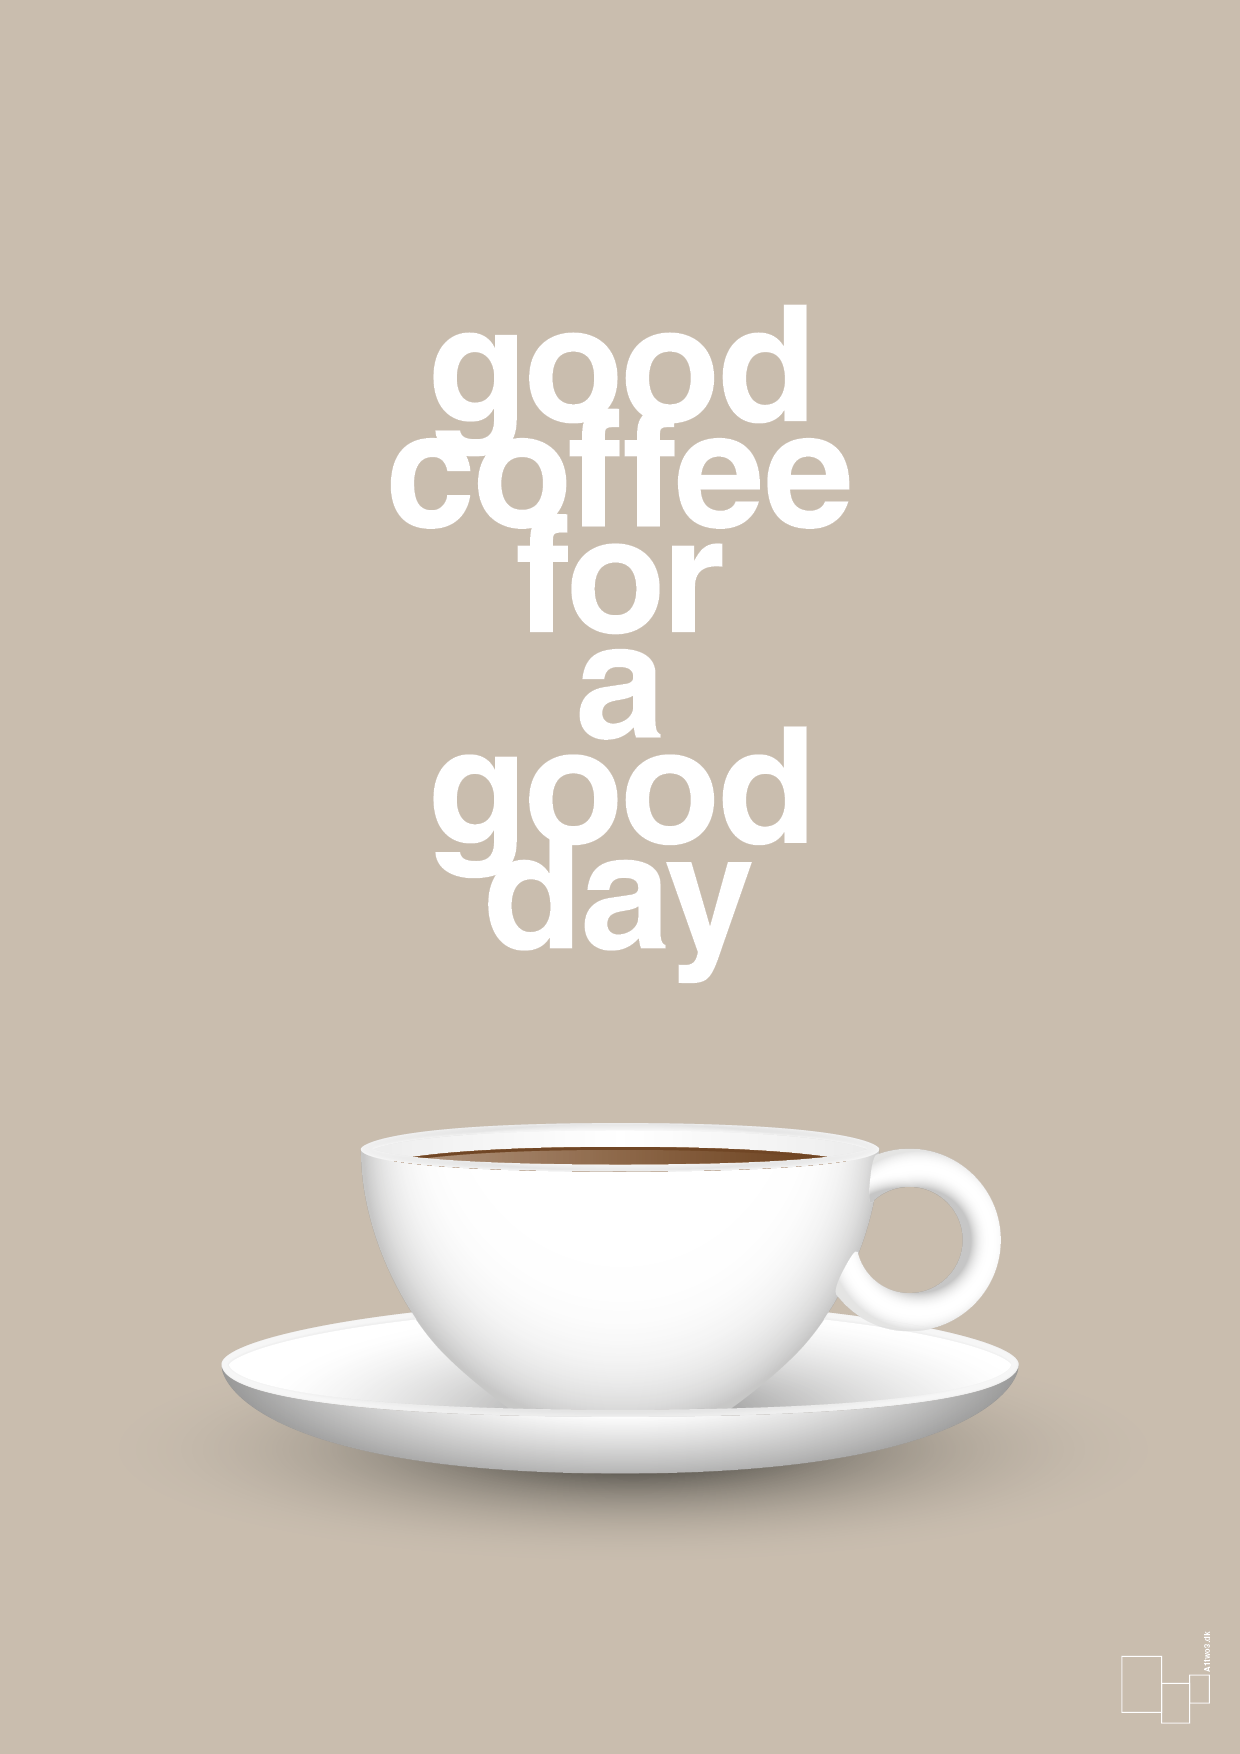 good coffee for a good day - Plakat med Mad & Drikke i Creamy Mushroom